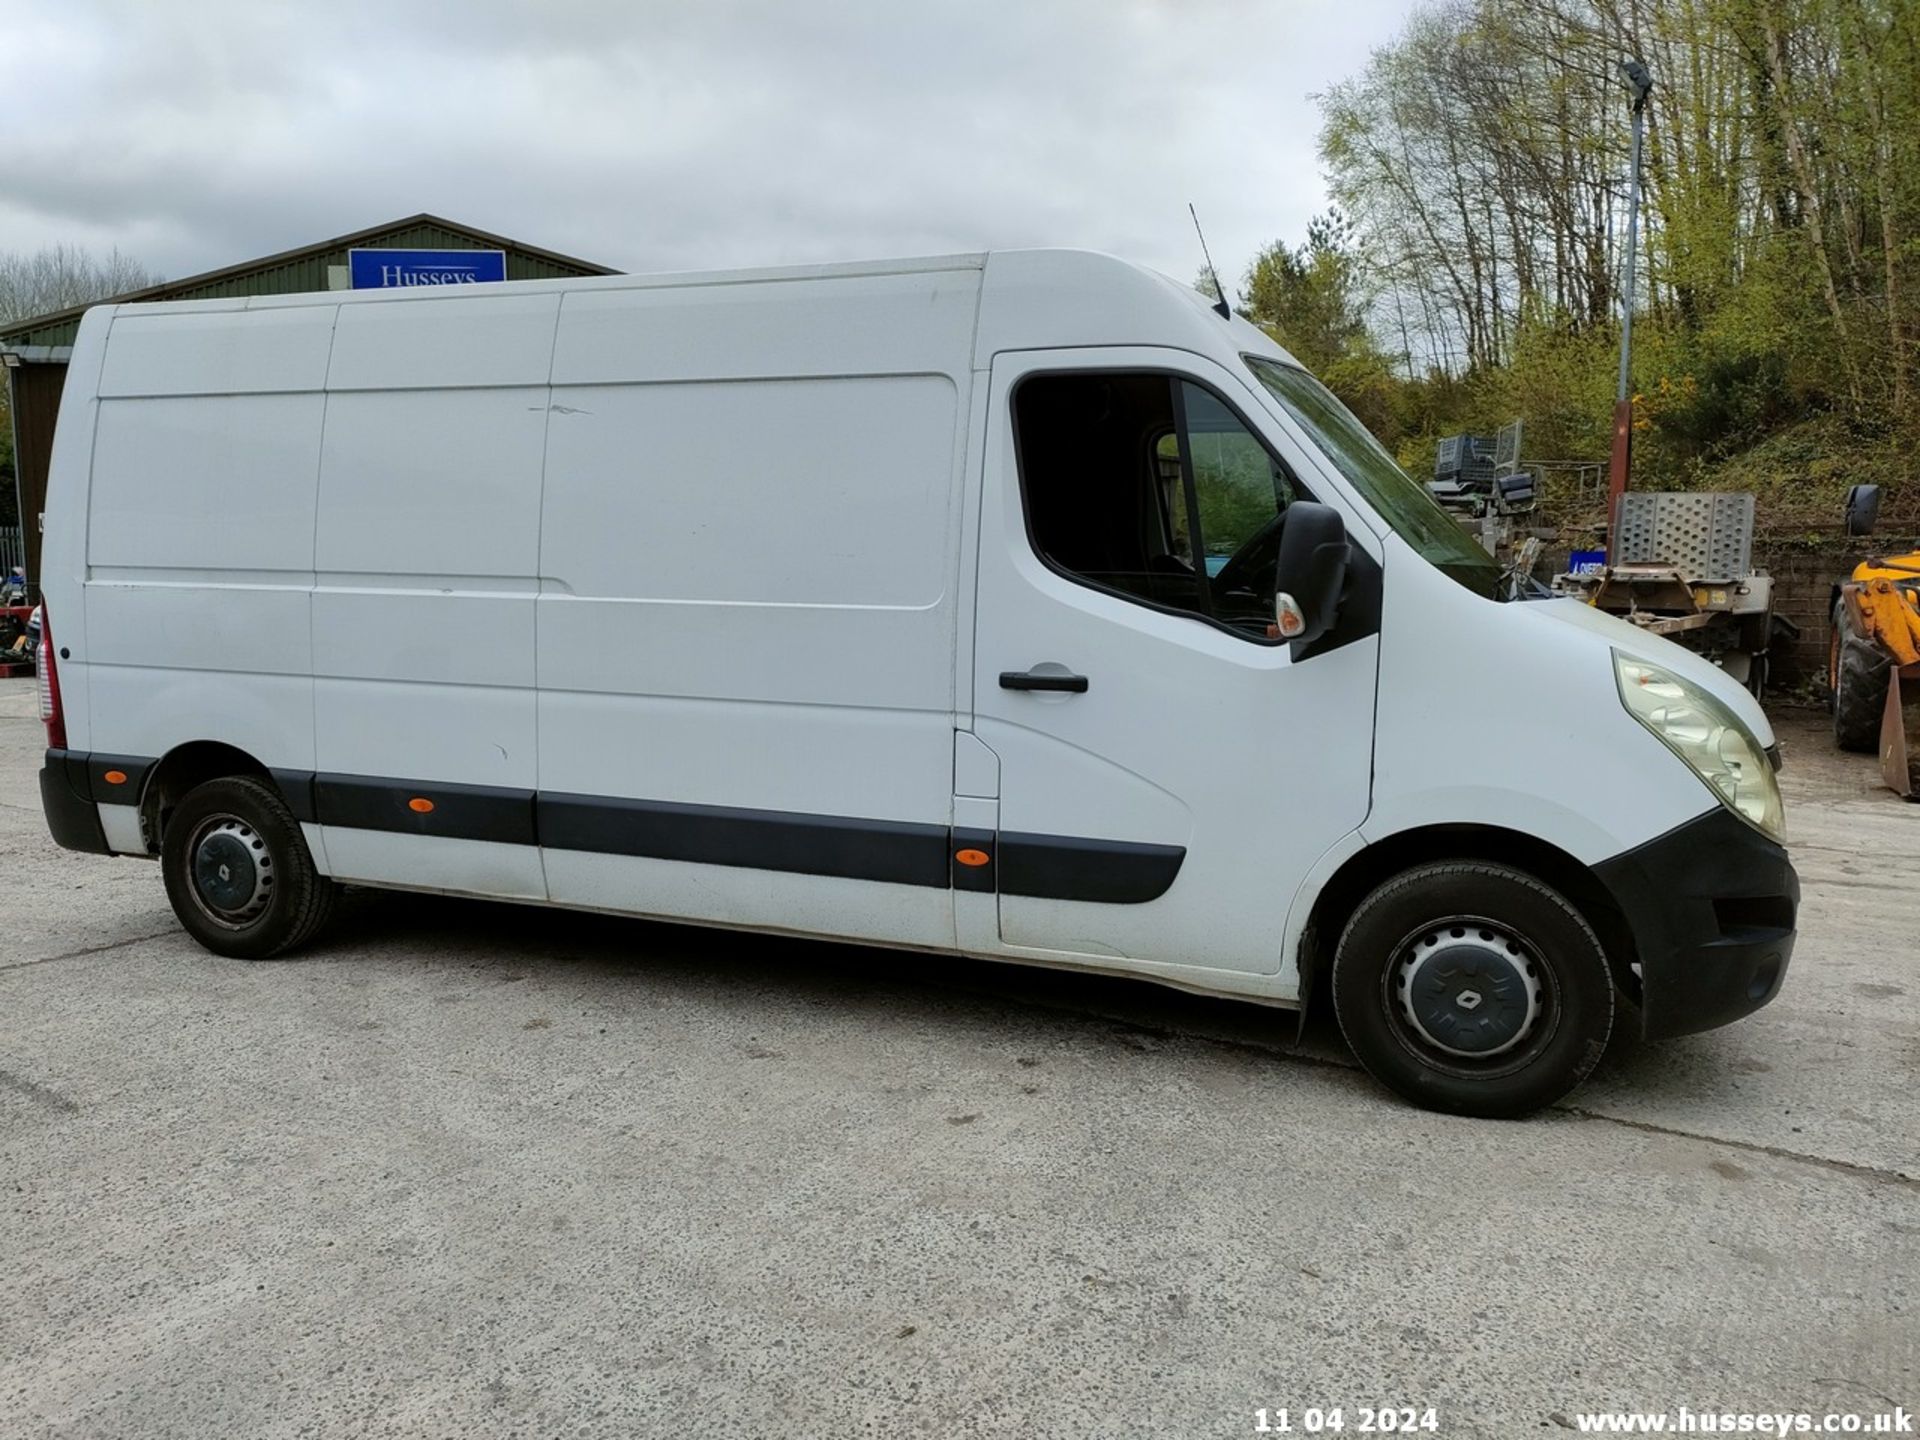 18/68 RENAULT MASTER LM35 BUSINESS DCI - 2298cc 5dr Van (White) - Image 45 of 68